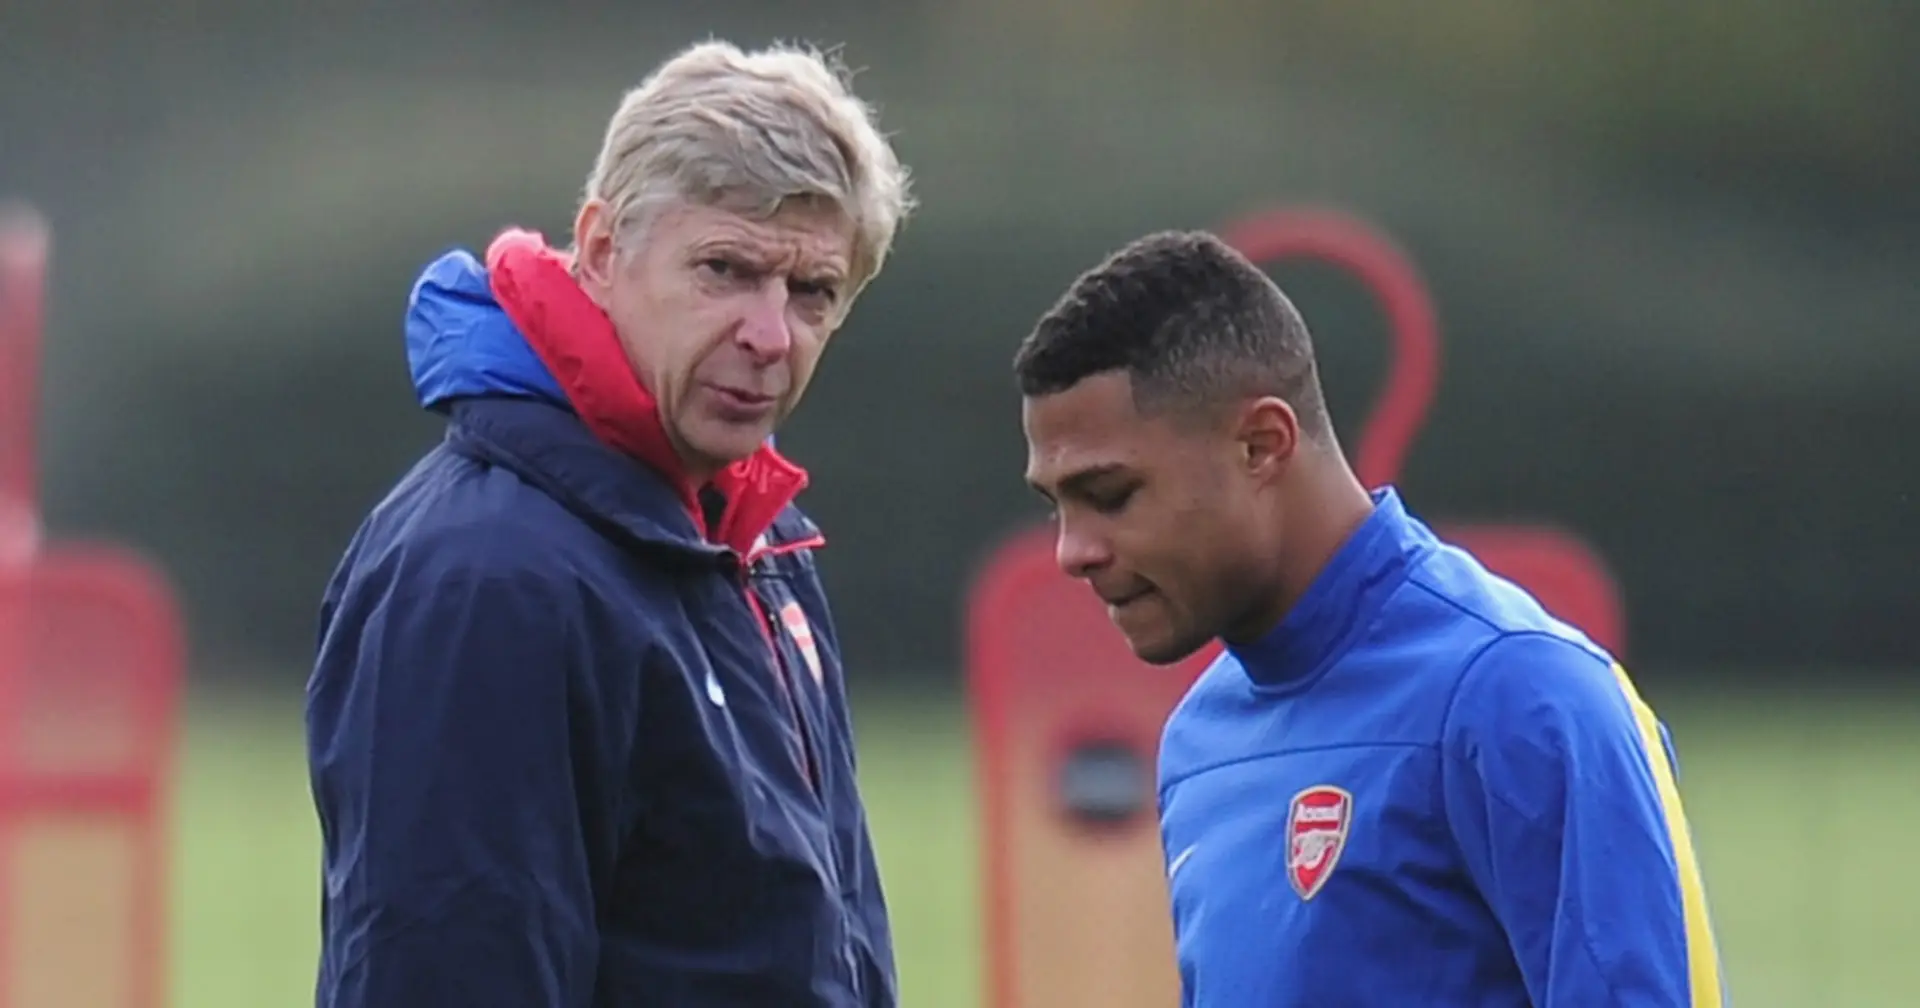 'We couldn't get it over the line': sad Wenger rues Gnabry's departure from Arsenal